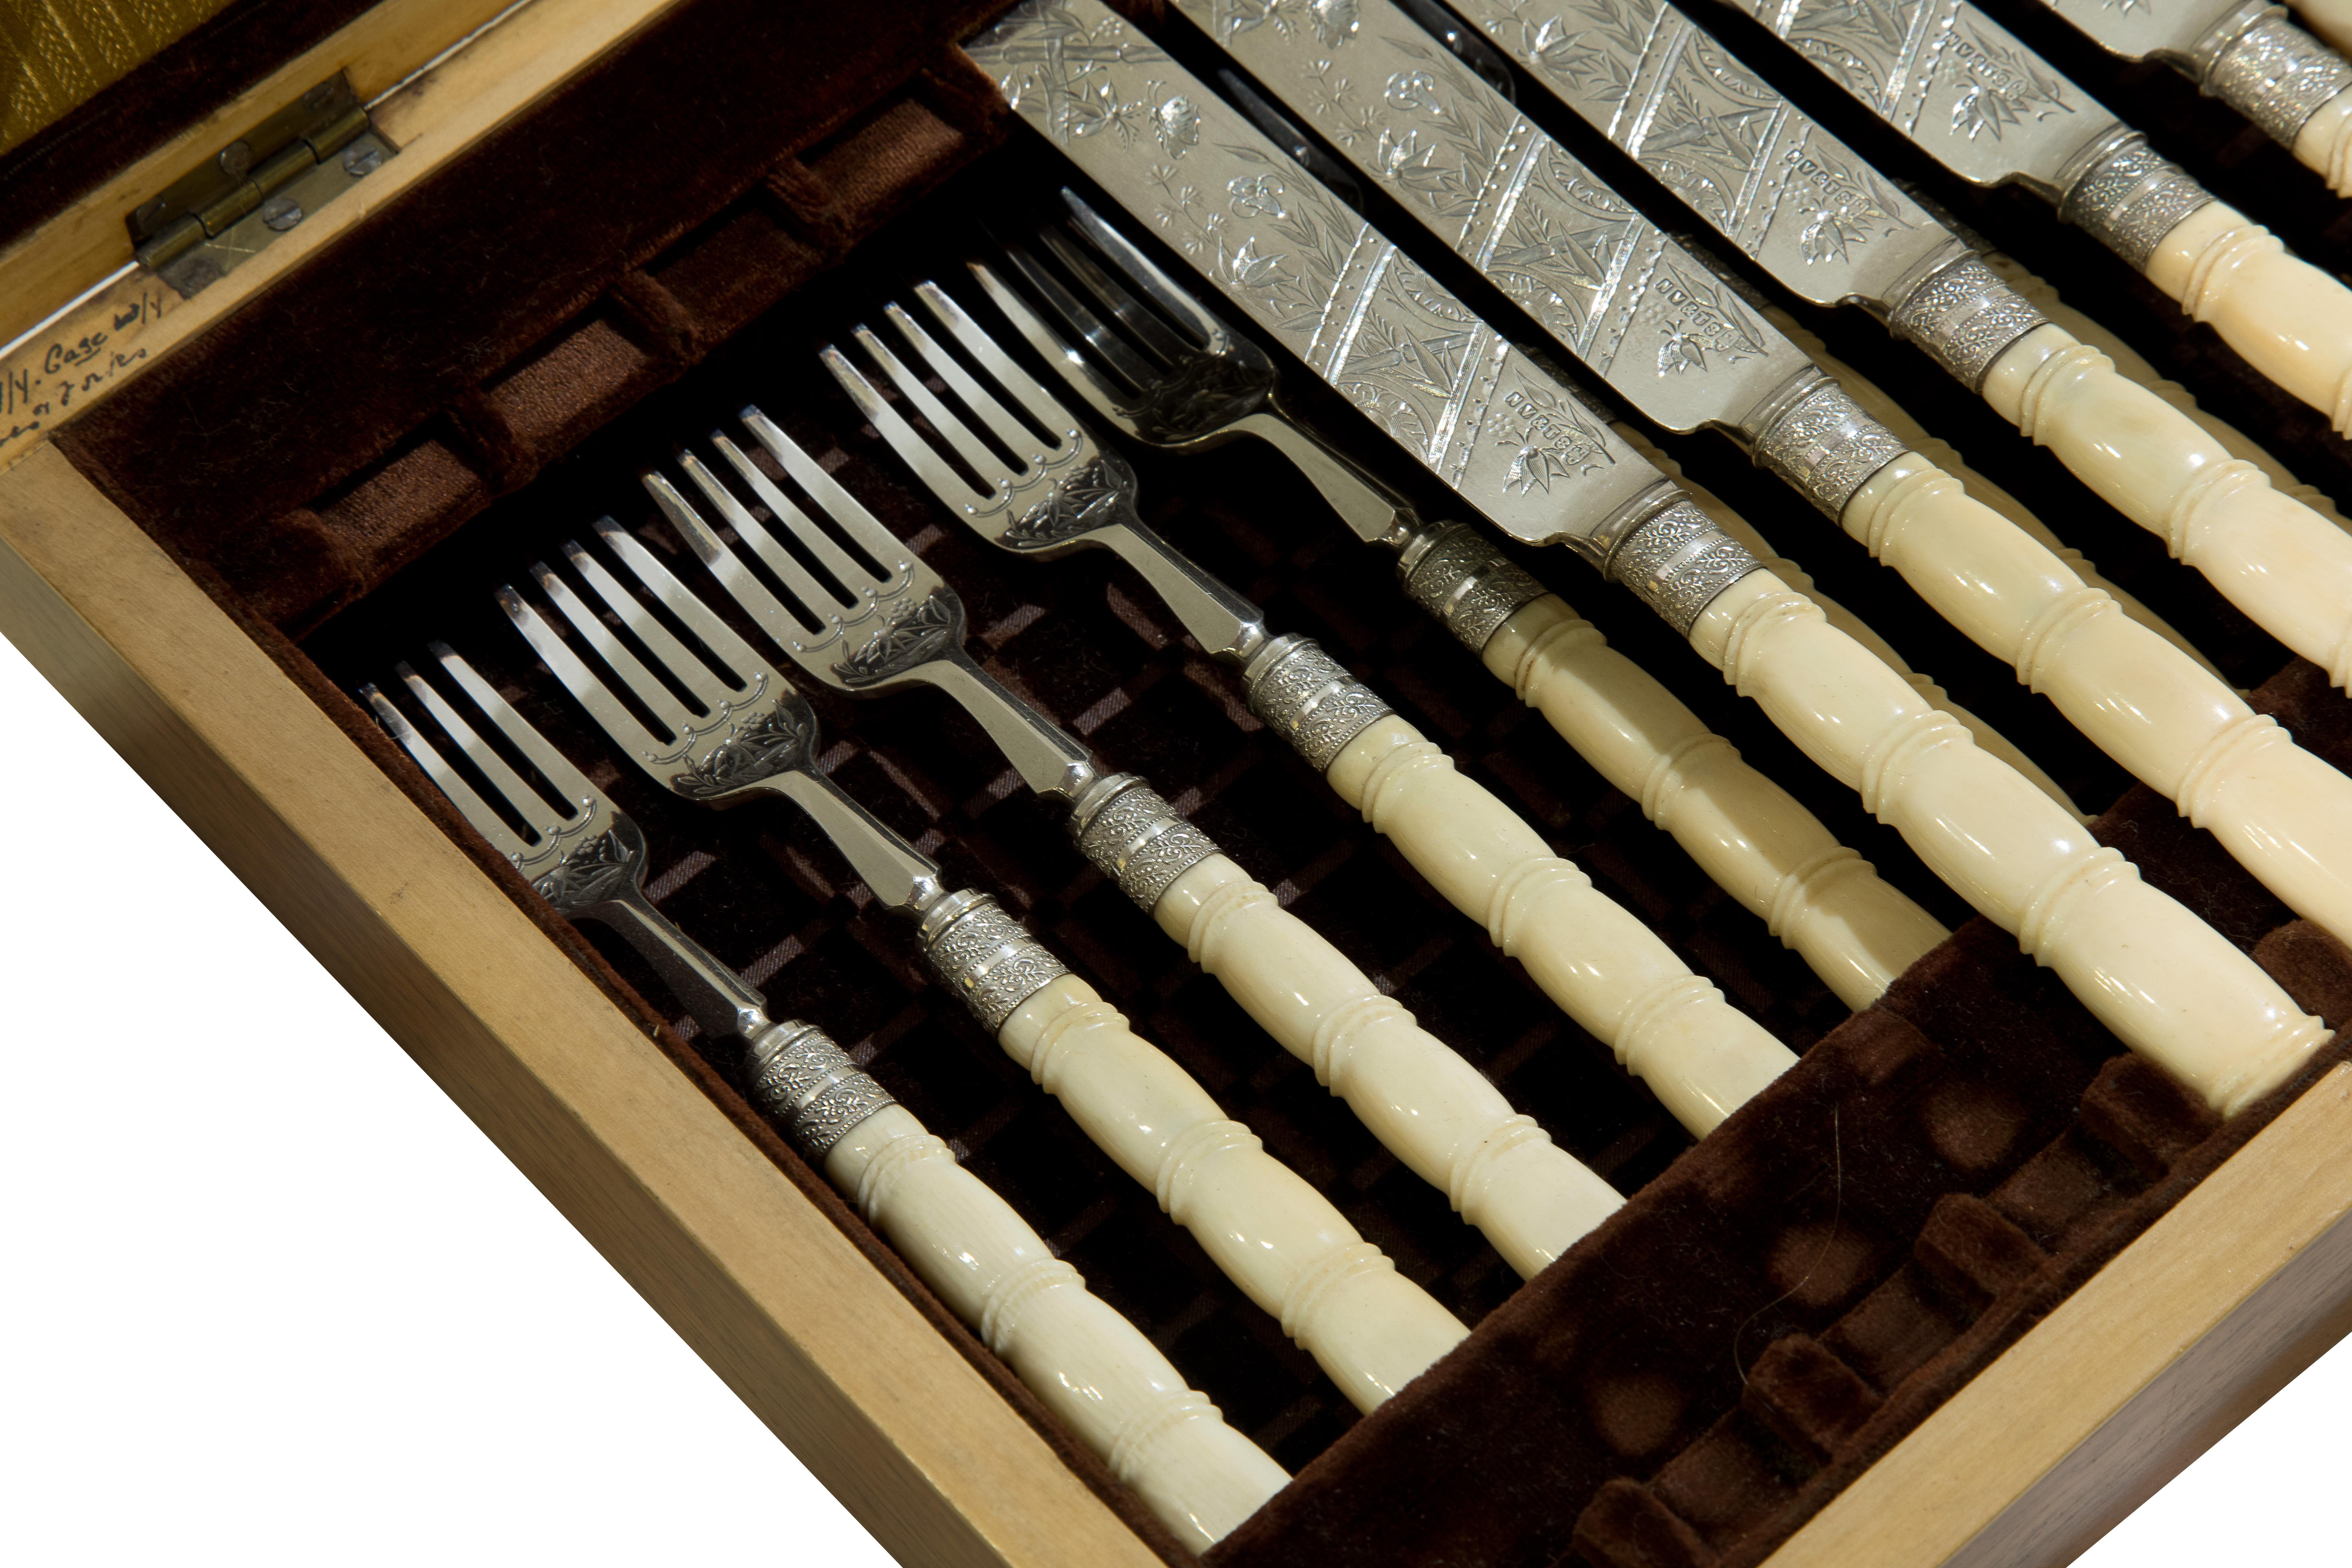 Bone Set of 12 Aesthetic Movement Knives and Forks in Original Box, circa 1870